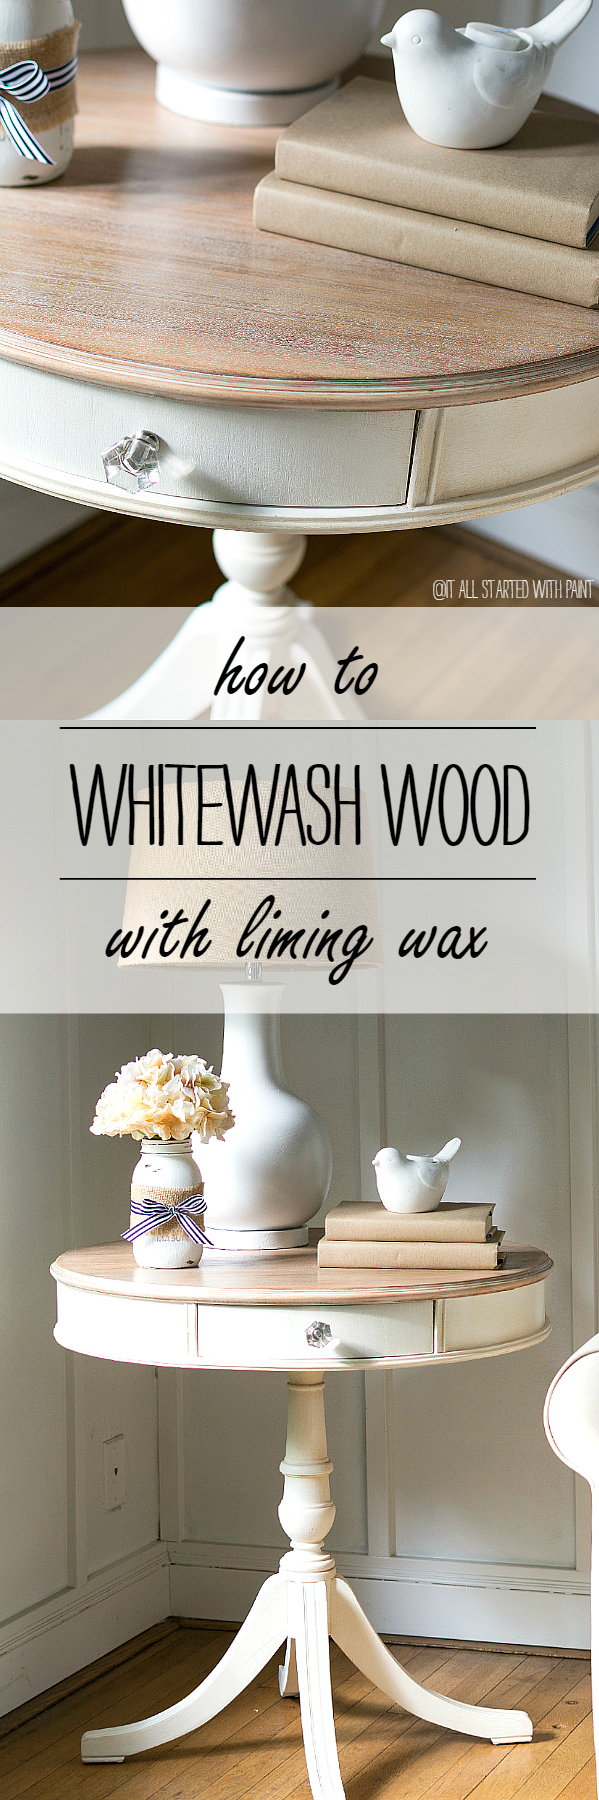 How To Whitewash Wood Using Liming Wax